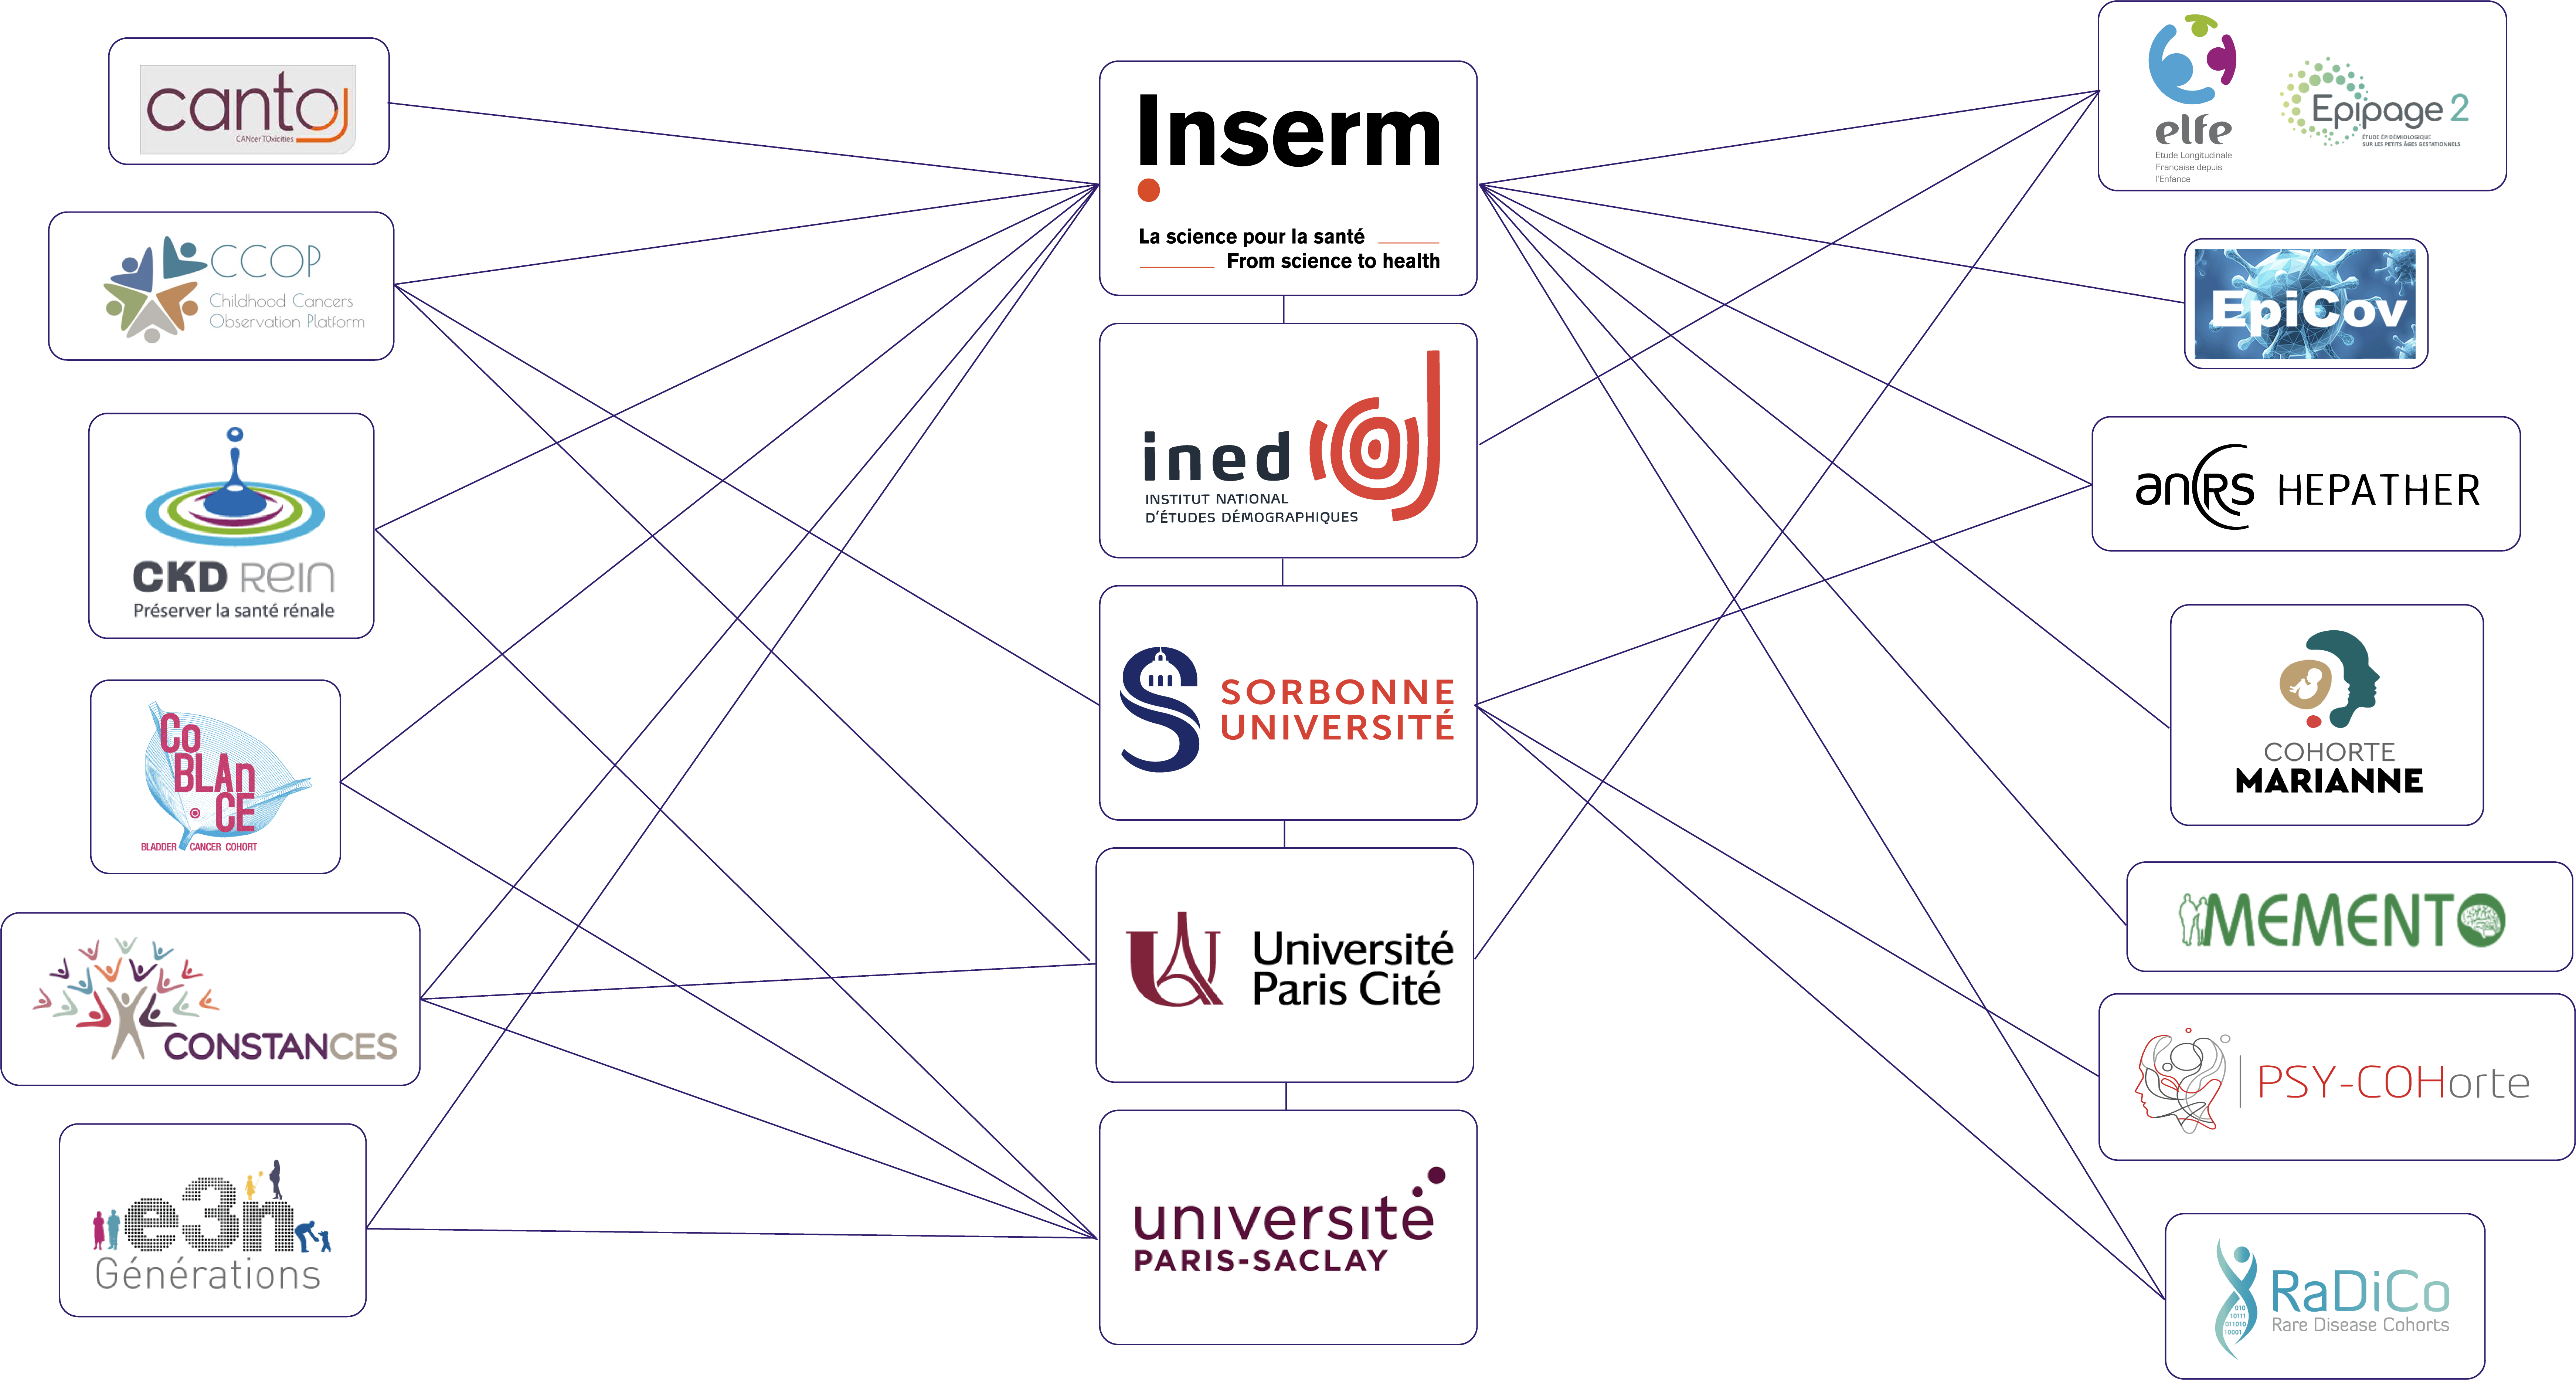 Logos of the french partners : Inserm, Ined, Sorbonne Université, Université Paris Cité, Université Paris-Saclay